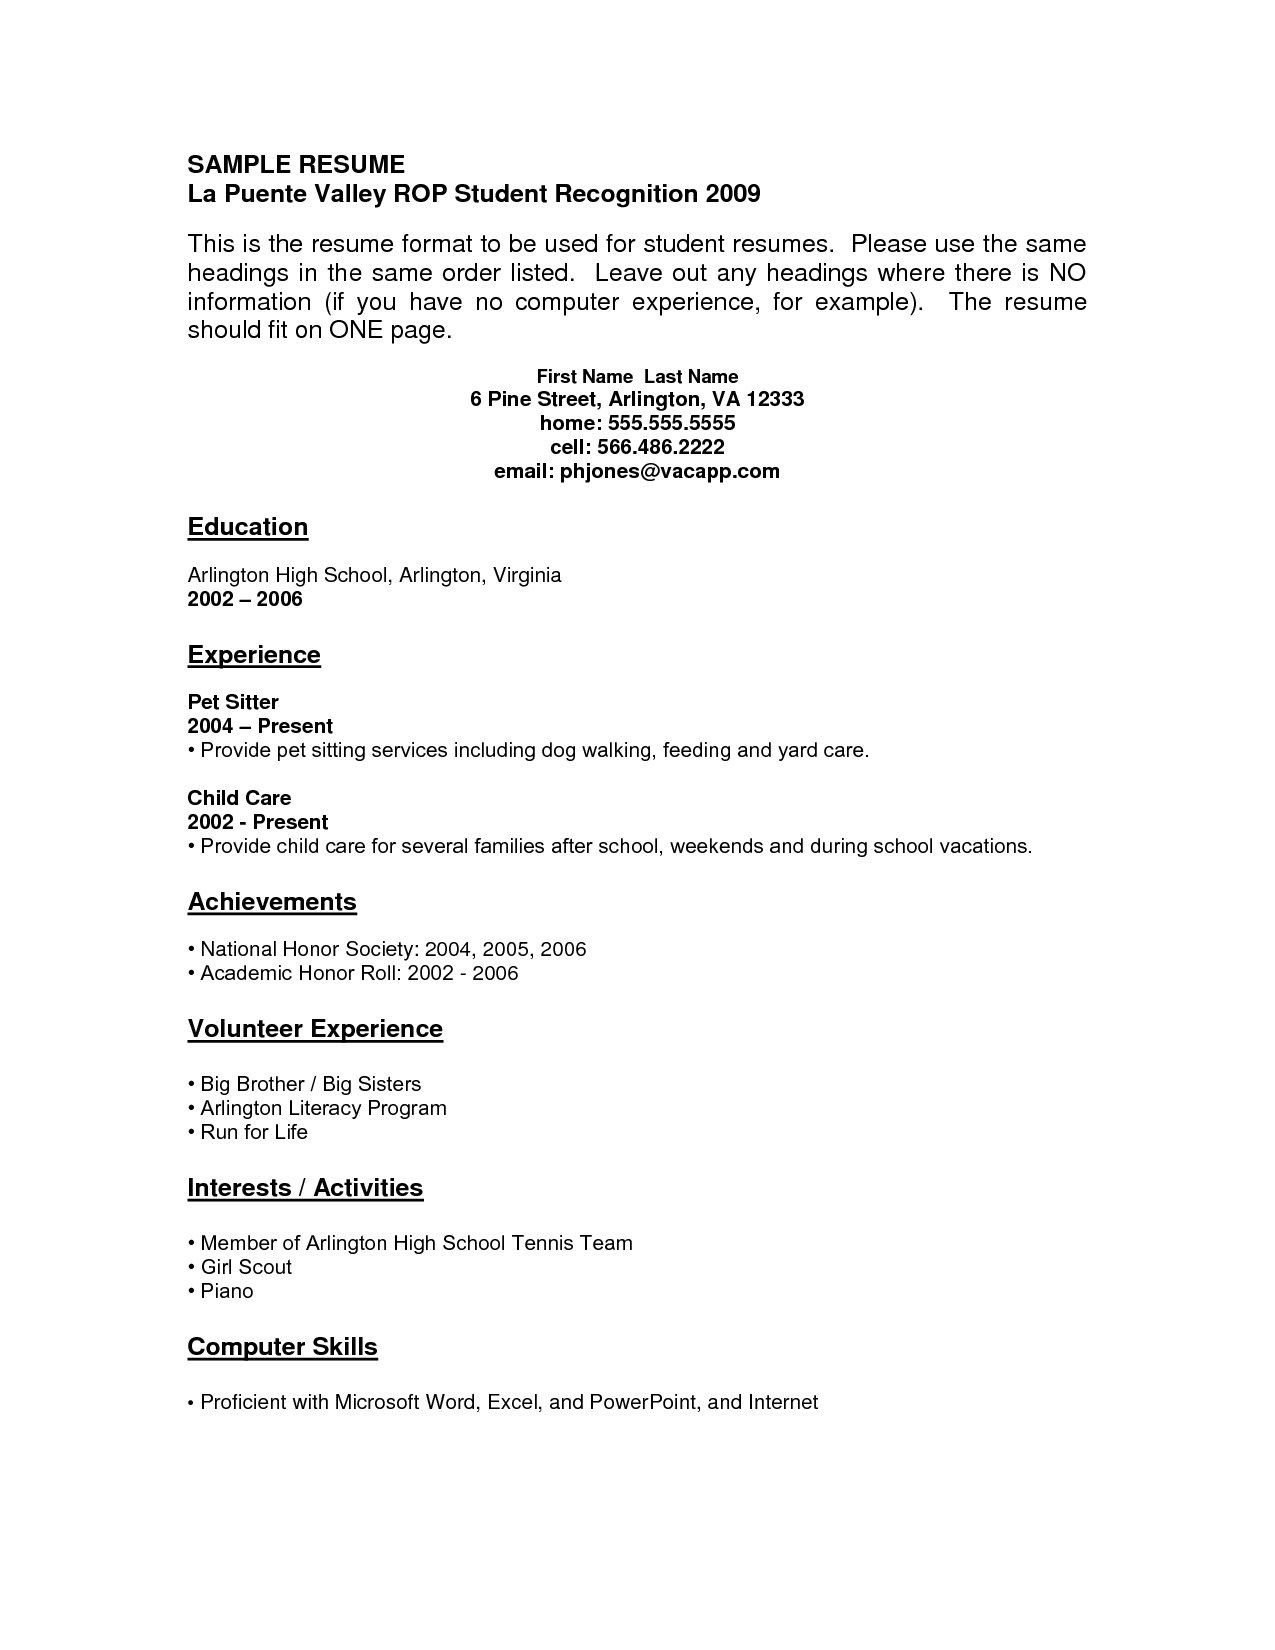 Sample Resume for High School Student with No Work History Resume Examples with No Job Experience – Resume Templates Job …